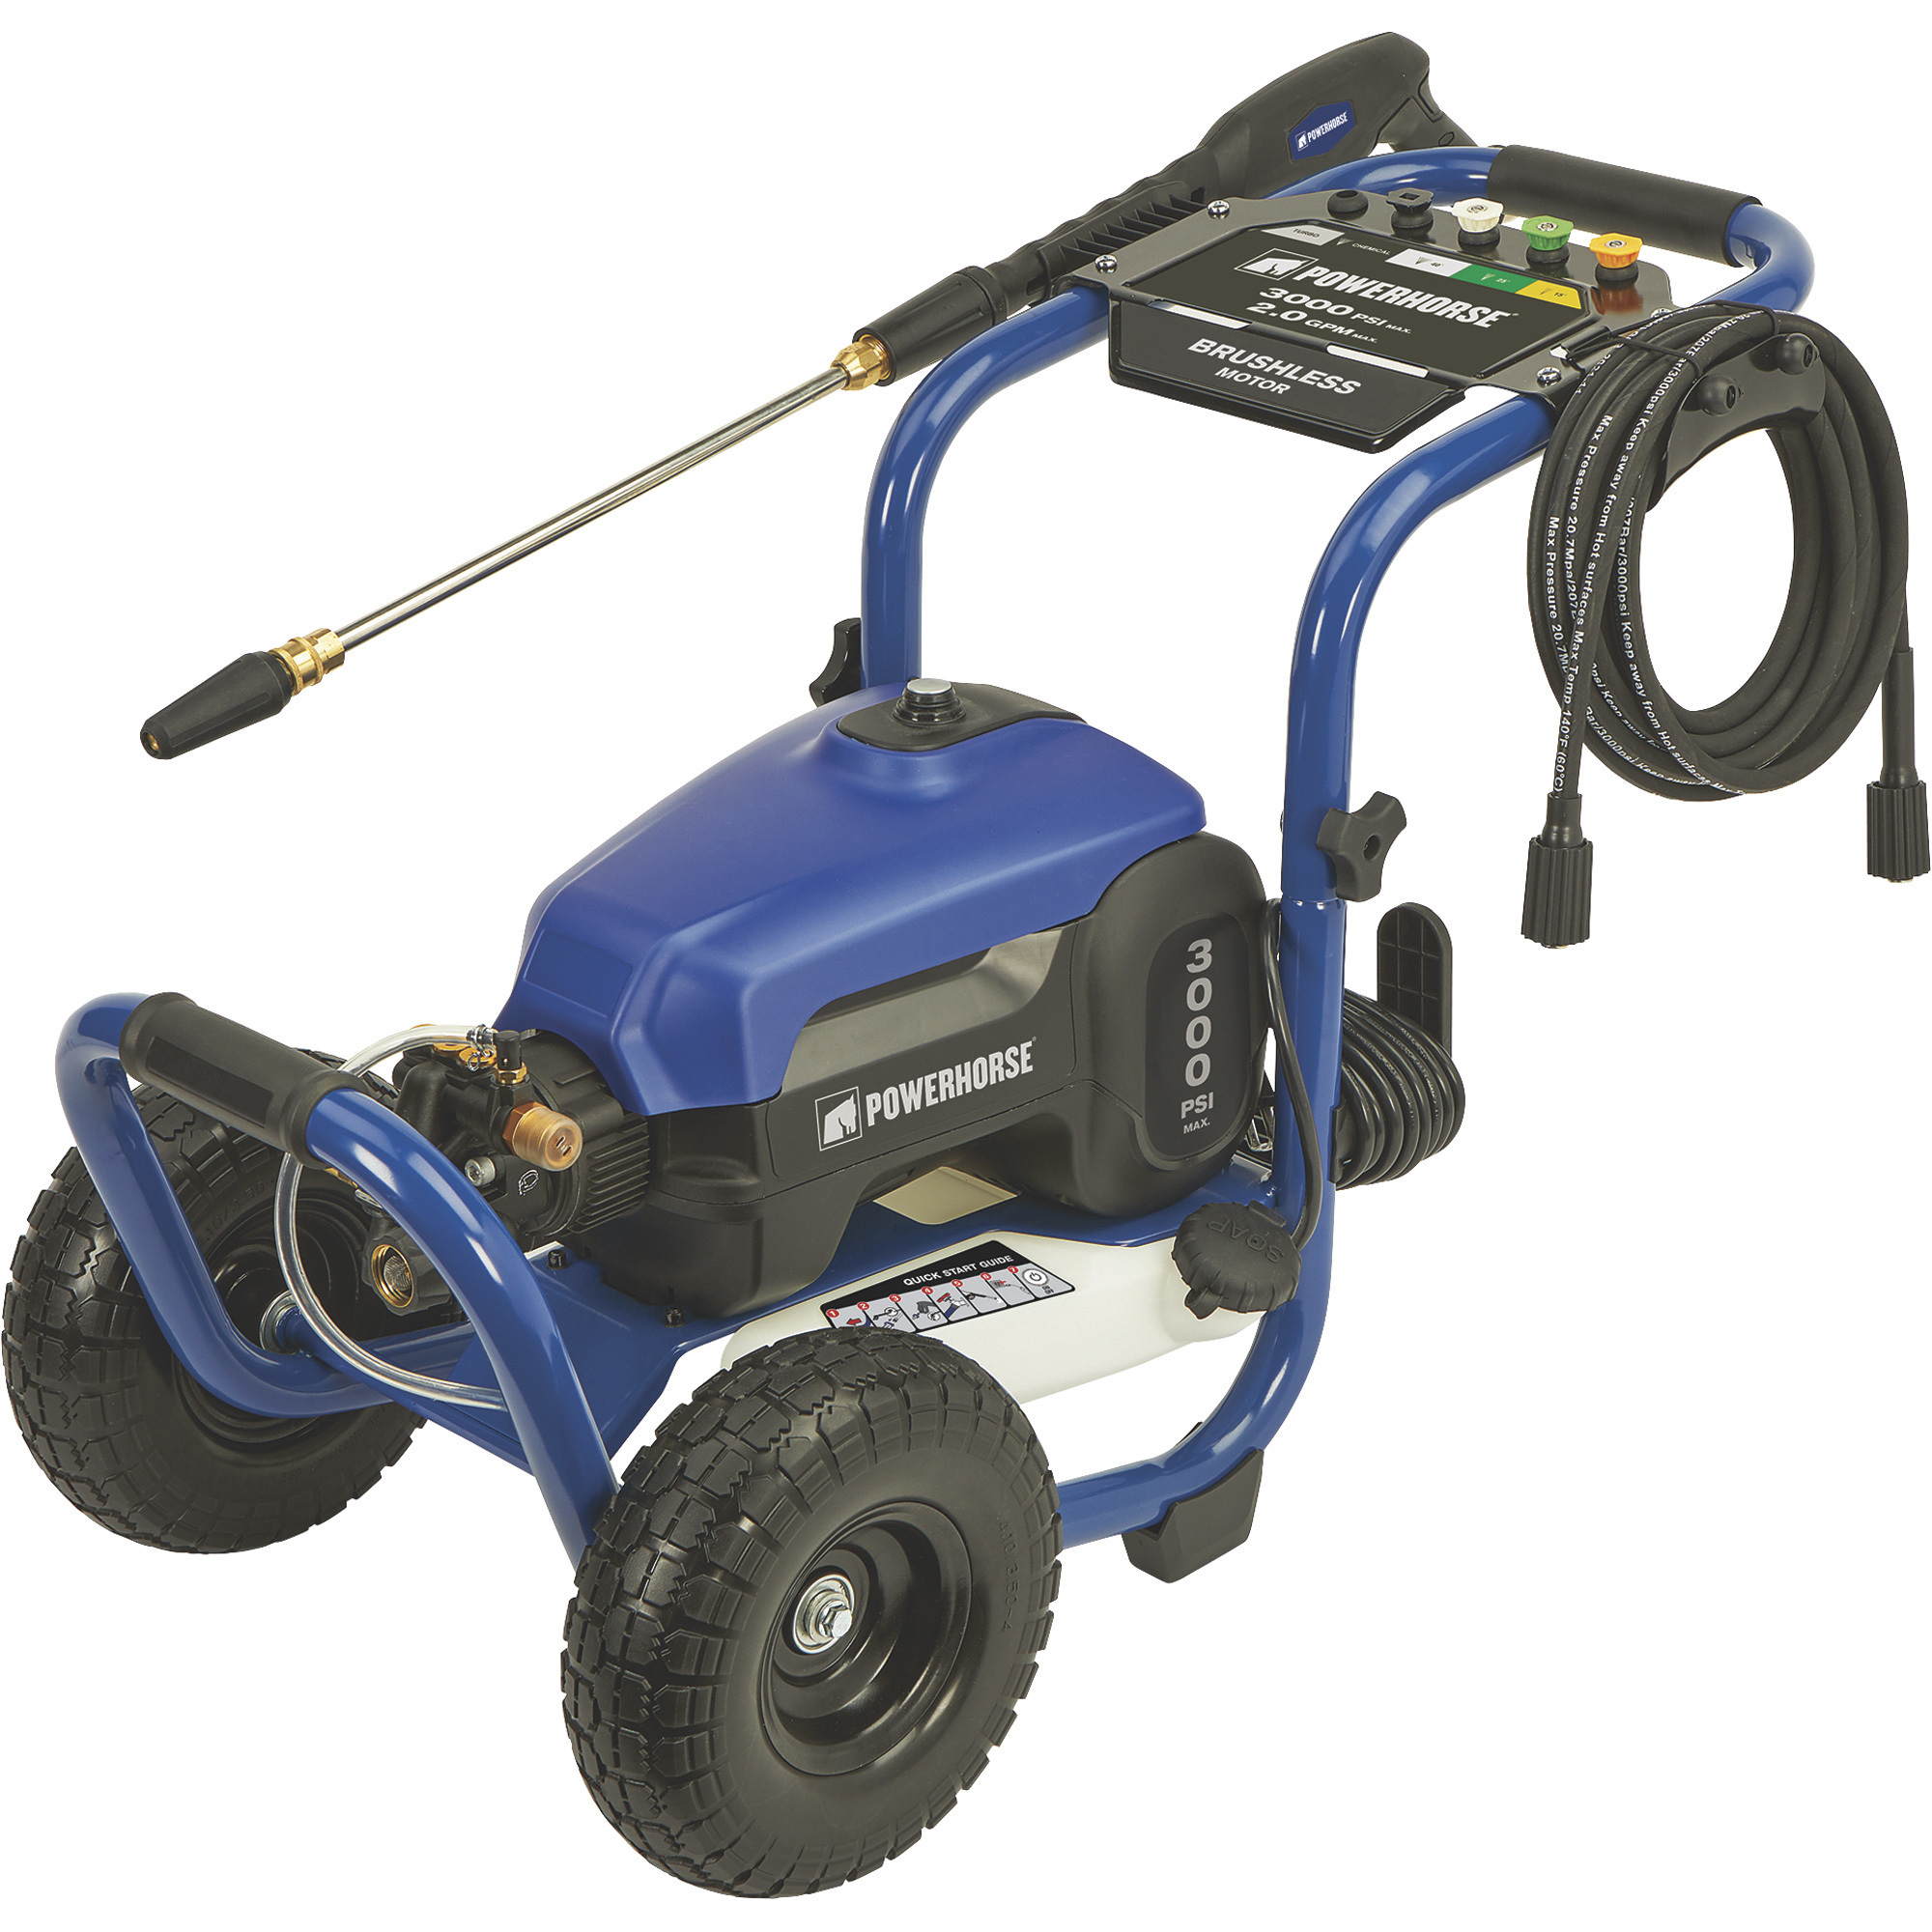 Powerhorse Portable Electric Cold Water Pressure Washer â 3000 PSI, 2.0 GPM, Model #113880